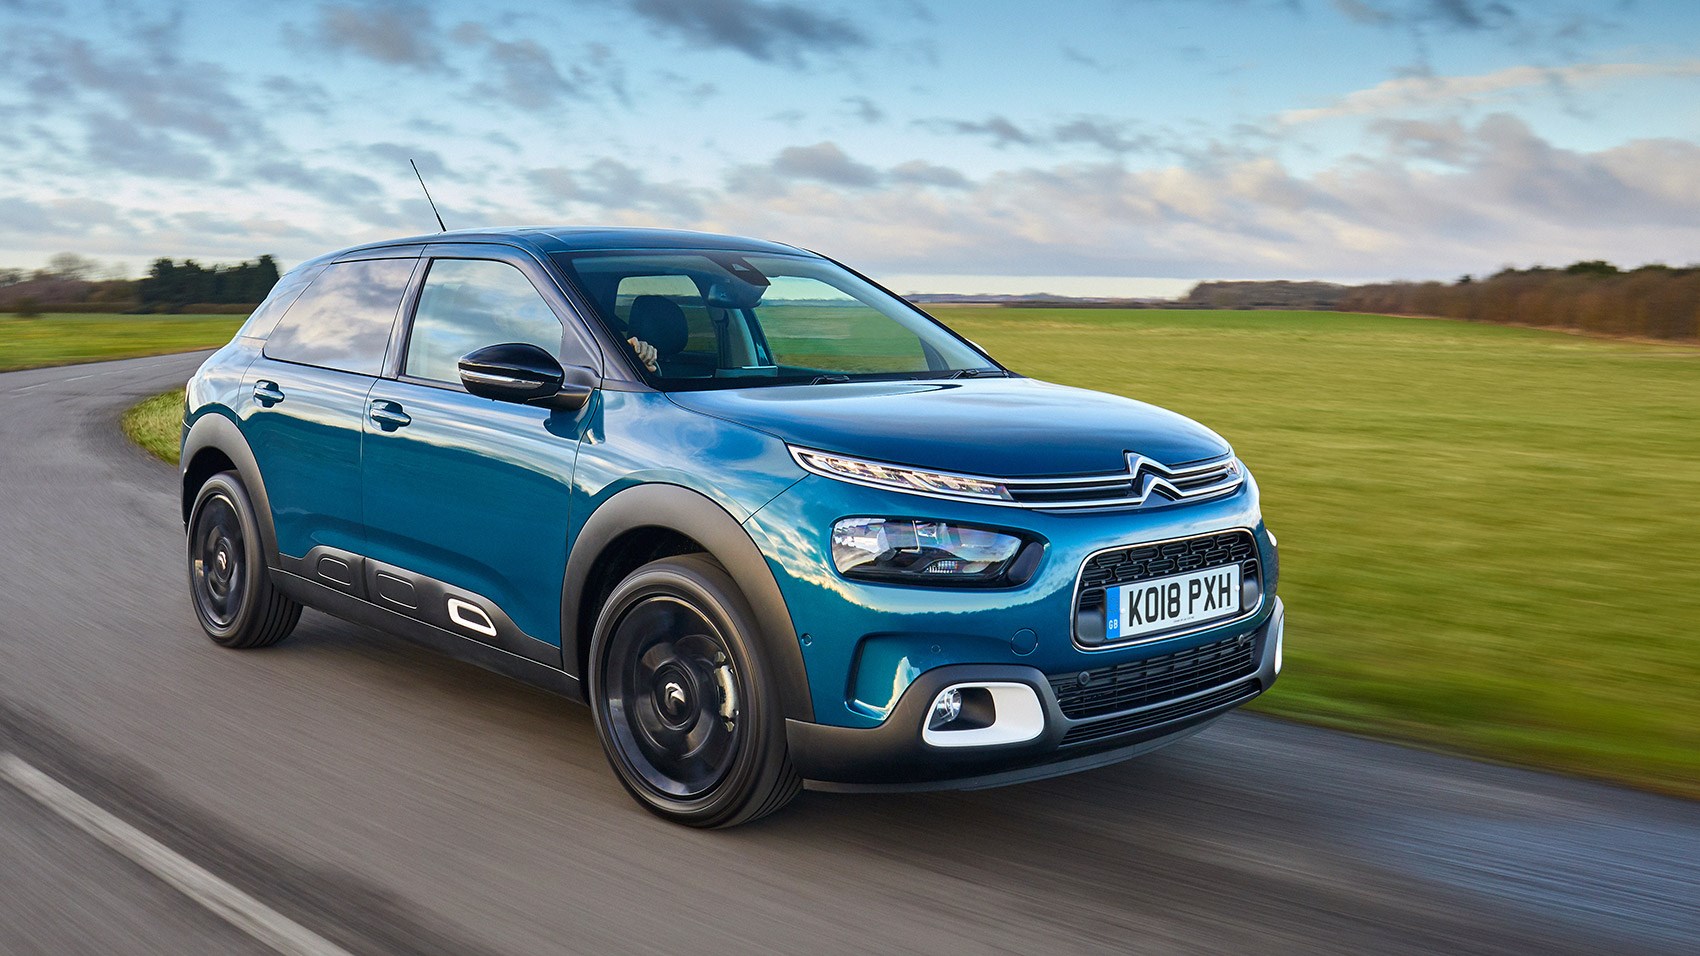 On the road in the new 2018 Citroen C4 Cactus: review, specs, prices, on sale dates